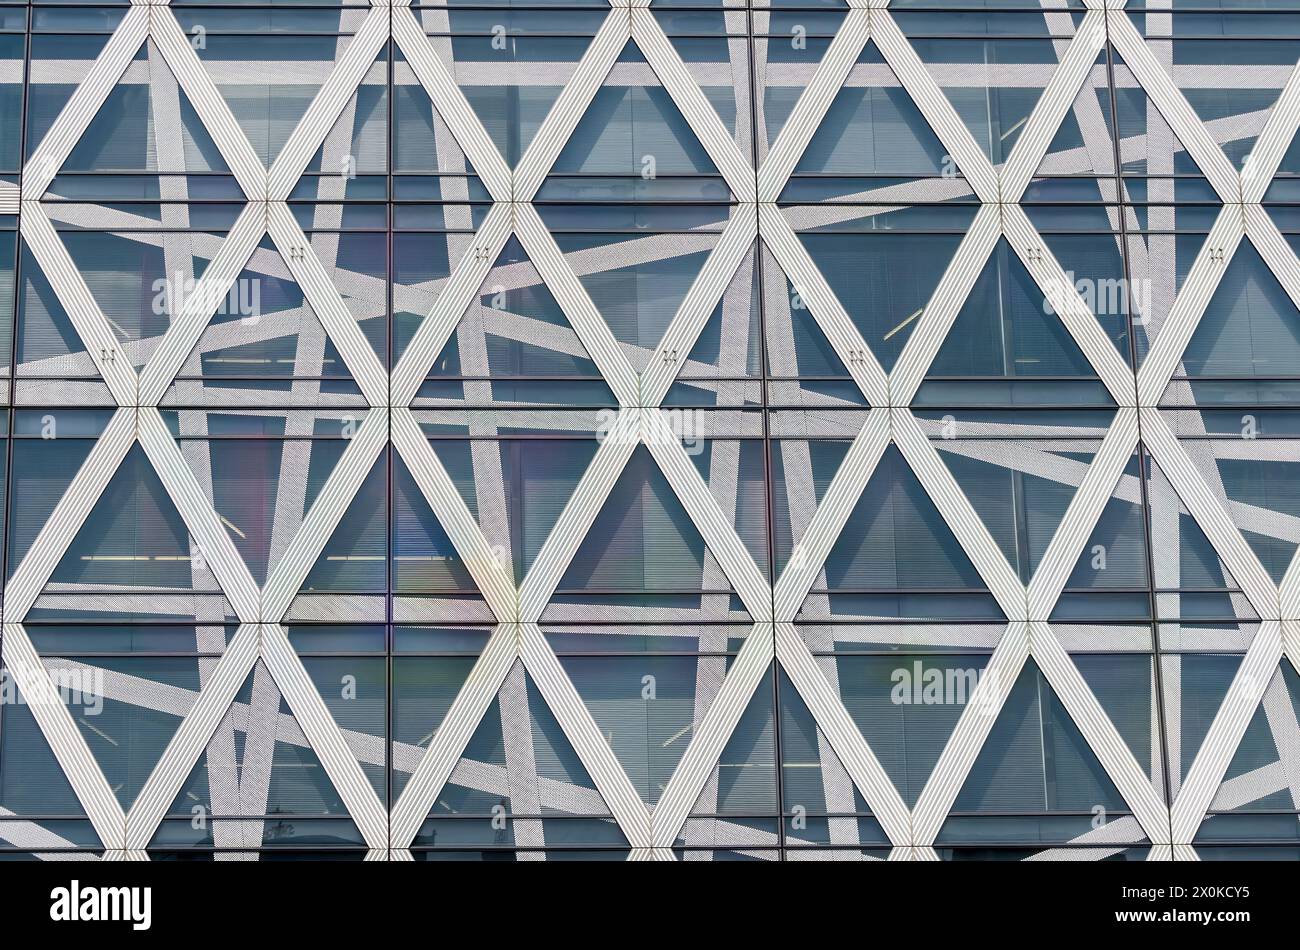 A building with a lot of white and black triangles. The triangles are arranged in a way that creates a sense of movement and energy. The building appe Stock Photo